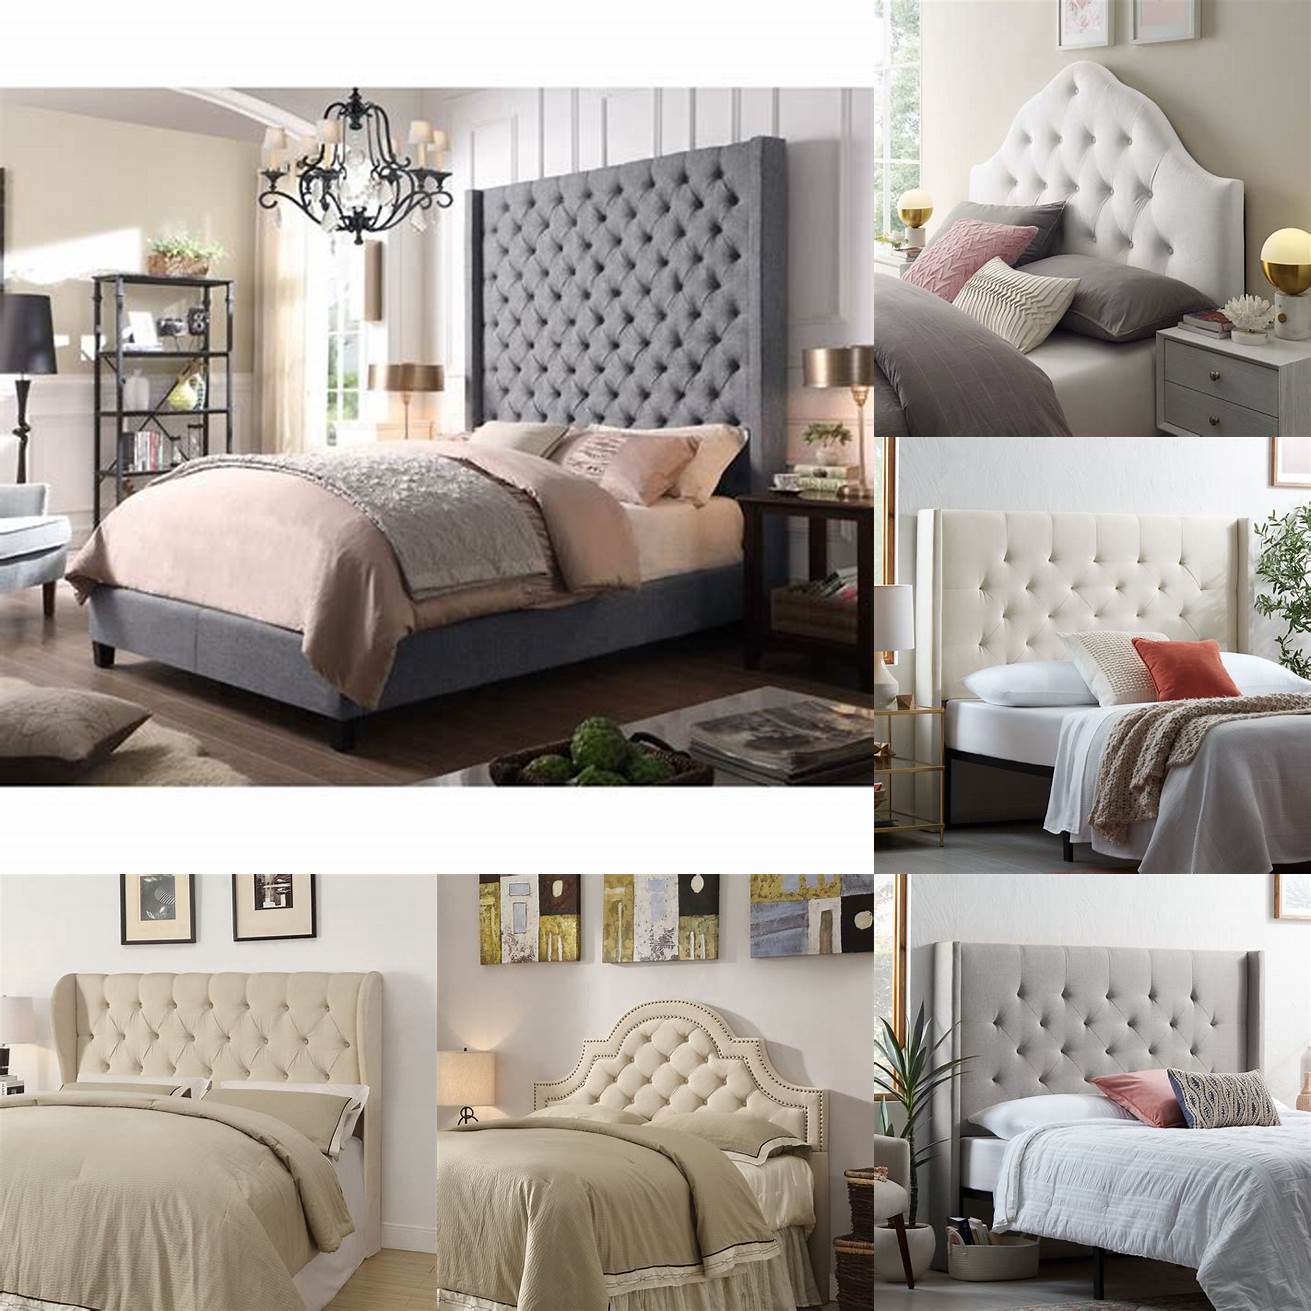 Comfort The padded headboard of a tufted bed provides extra cushioning for your back and neck making it more comfortable to sit up in bed and read or watch TV